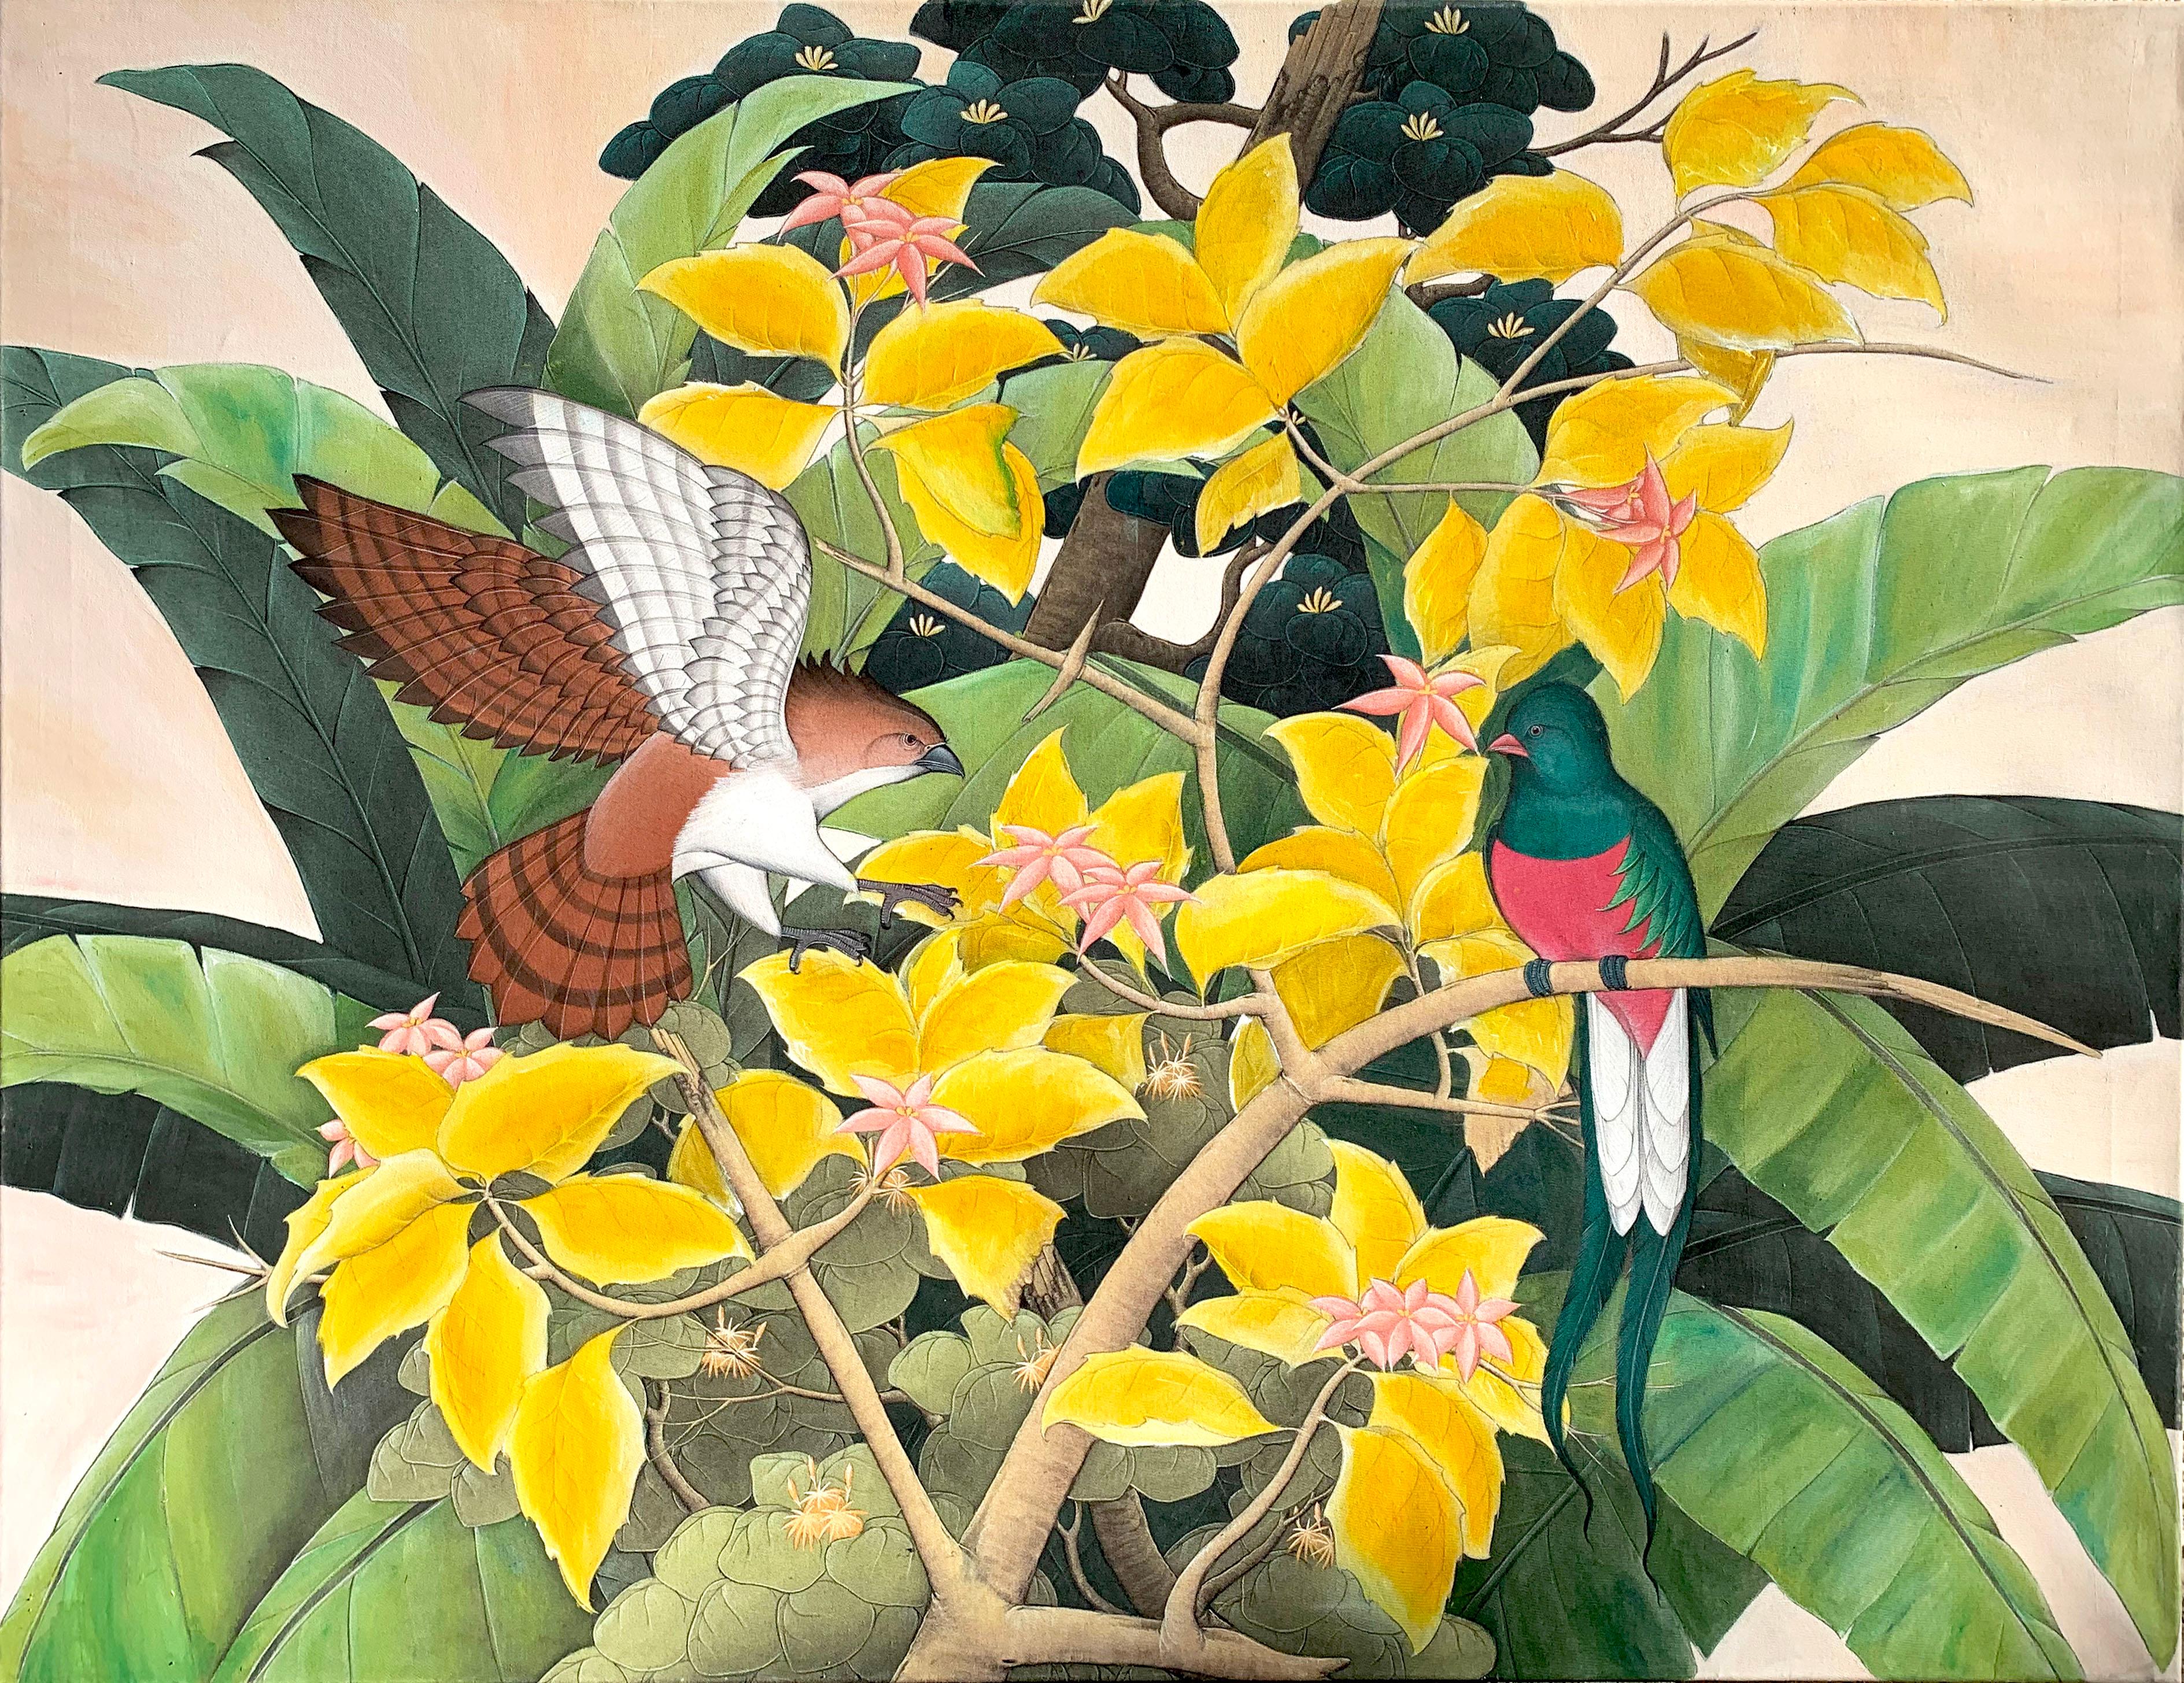 Bustling Jungle by Katharina Husslein - contemporary landscape with birds